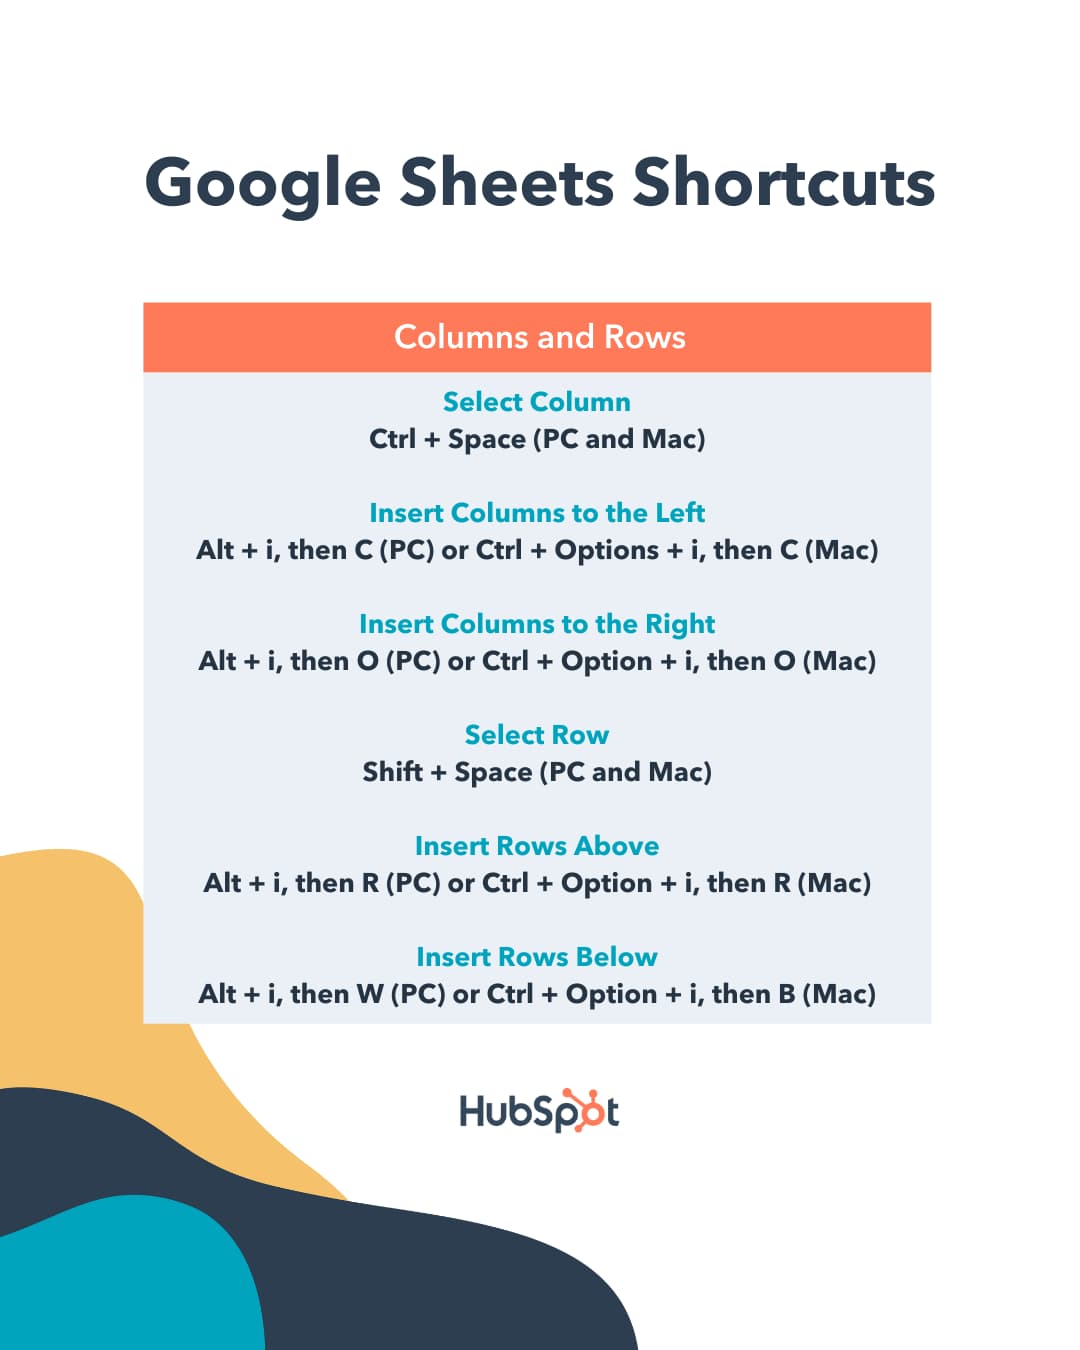 How to use Google Sheets shortcuts to select columns, insert columns left or right, select rows, and select rows above or below. 